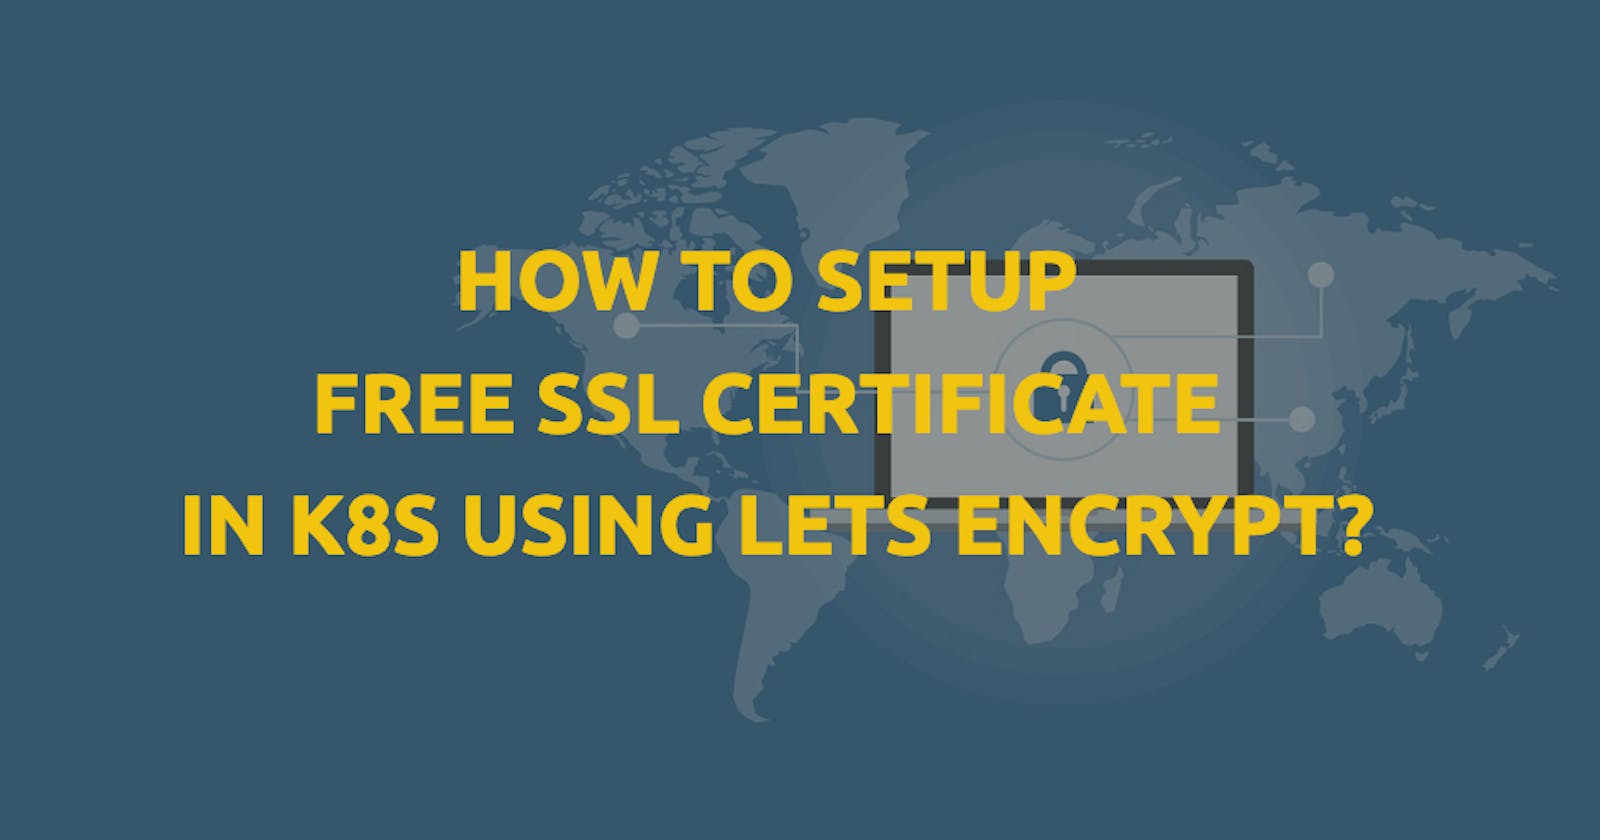 How to setup free ssl certificate in k8s using lets encrypt?